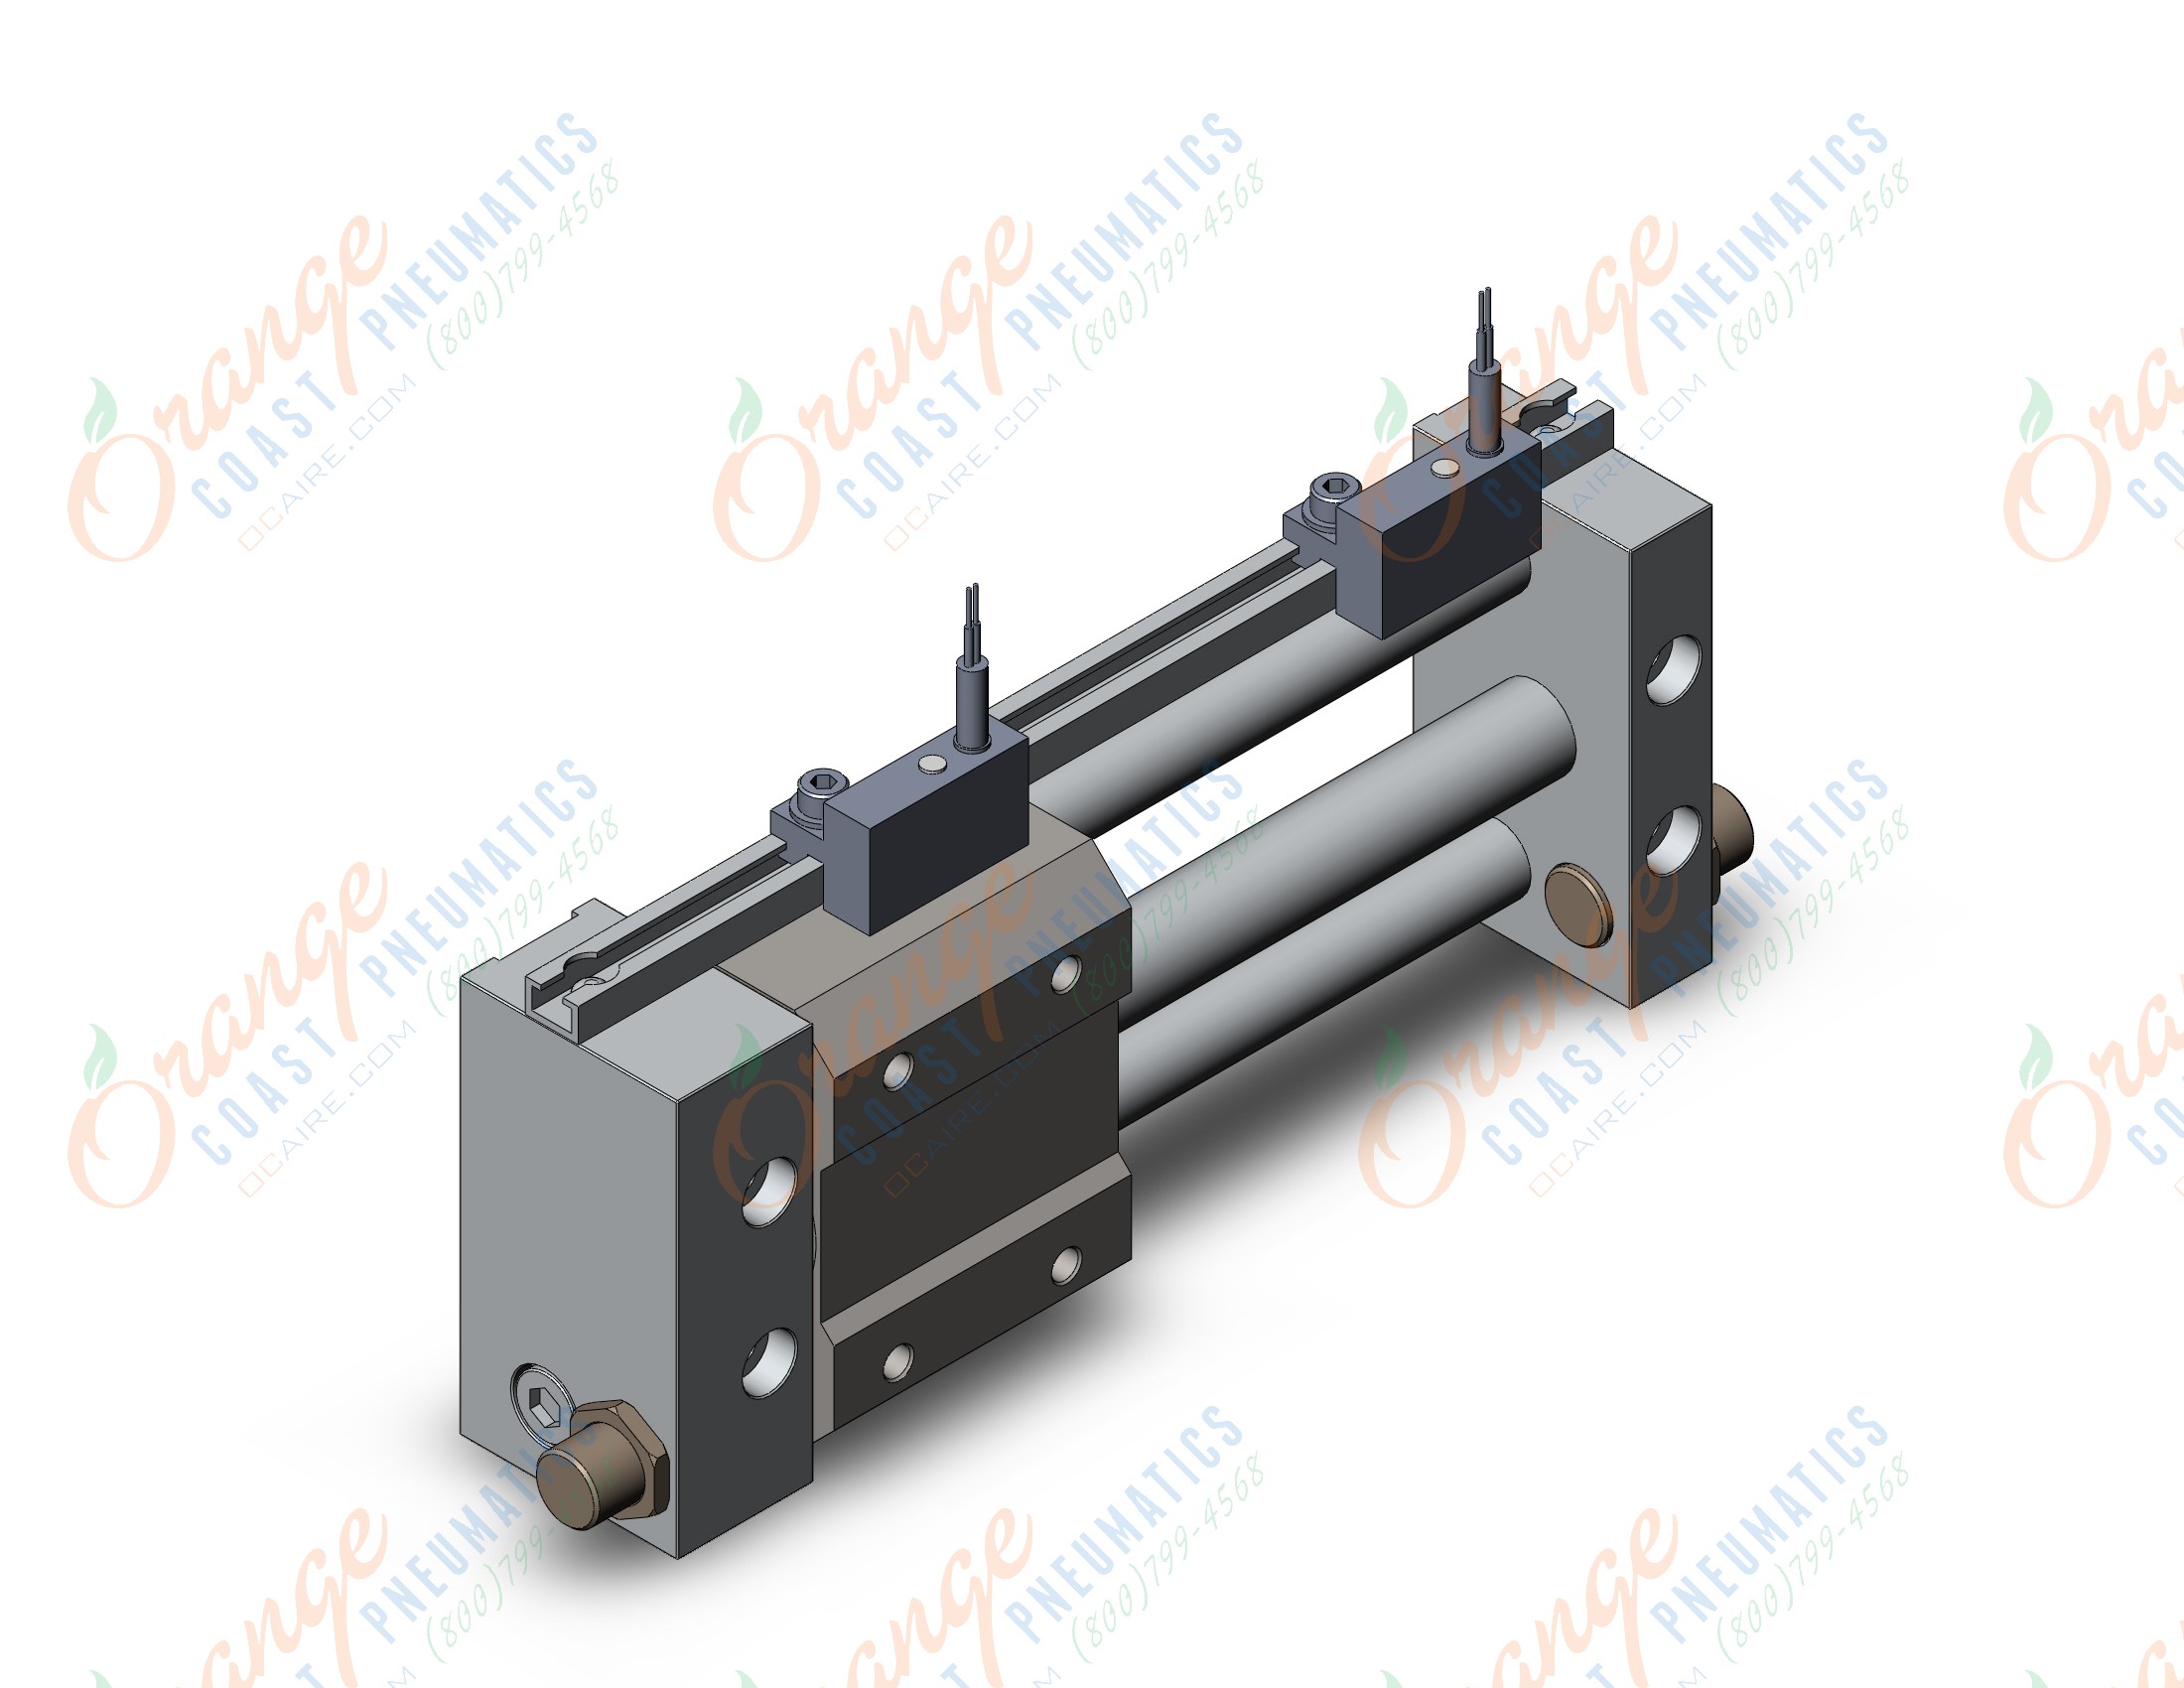 SMC NCDY2S10H-0300-J79CL cylinder, NCY2S GUIDED CYLINDER